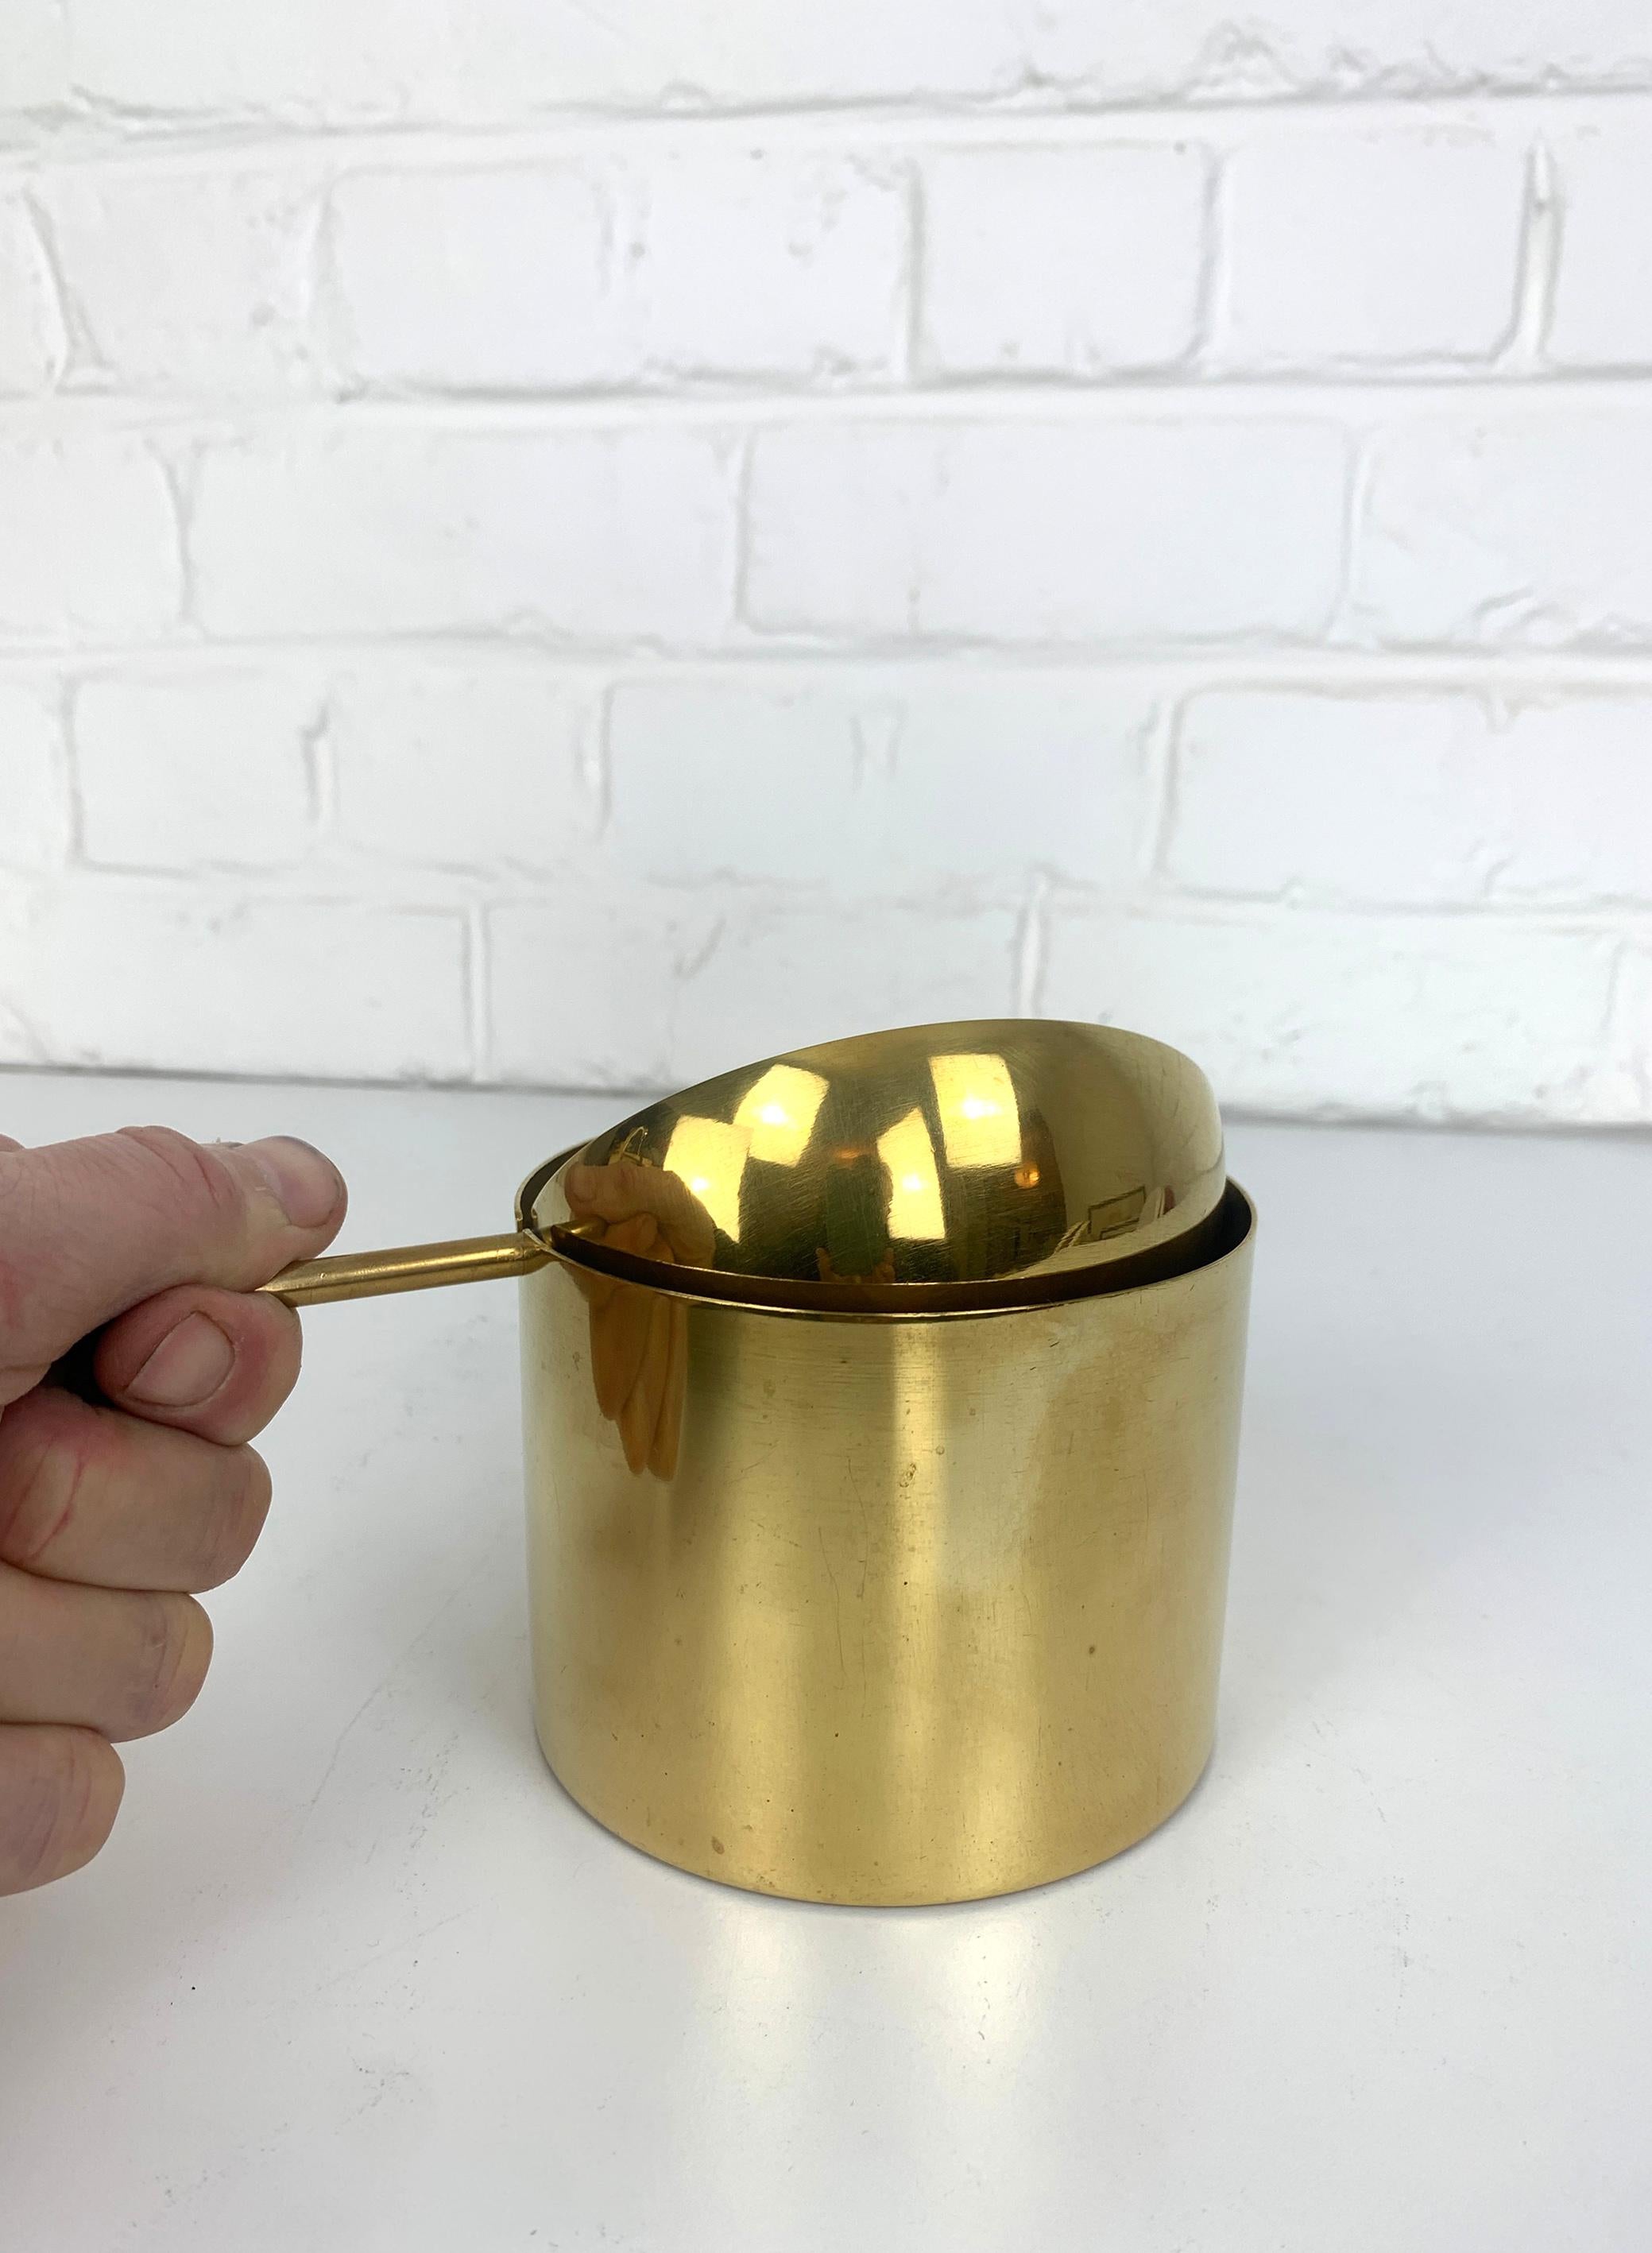 20th Century Large Brass Ashtray by Arne Jacobsen for Stelton, Cylinda-Line, 1960s For Sale